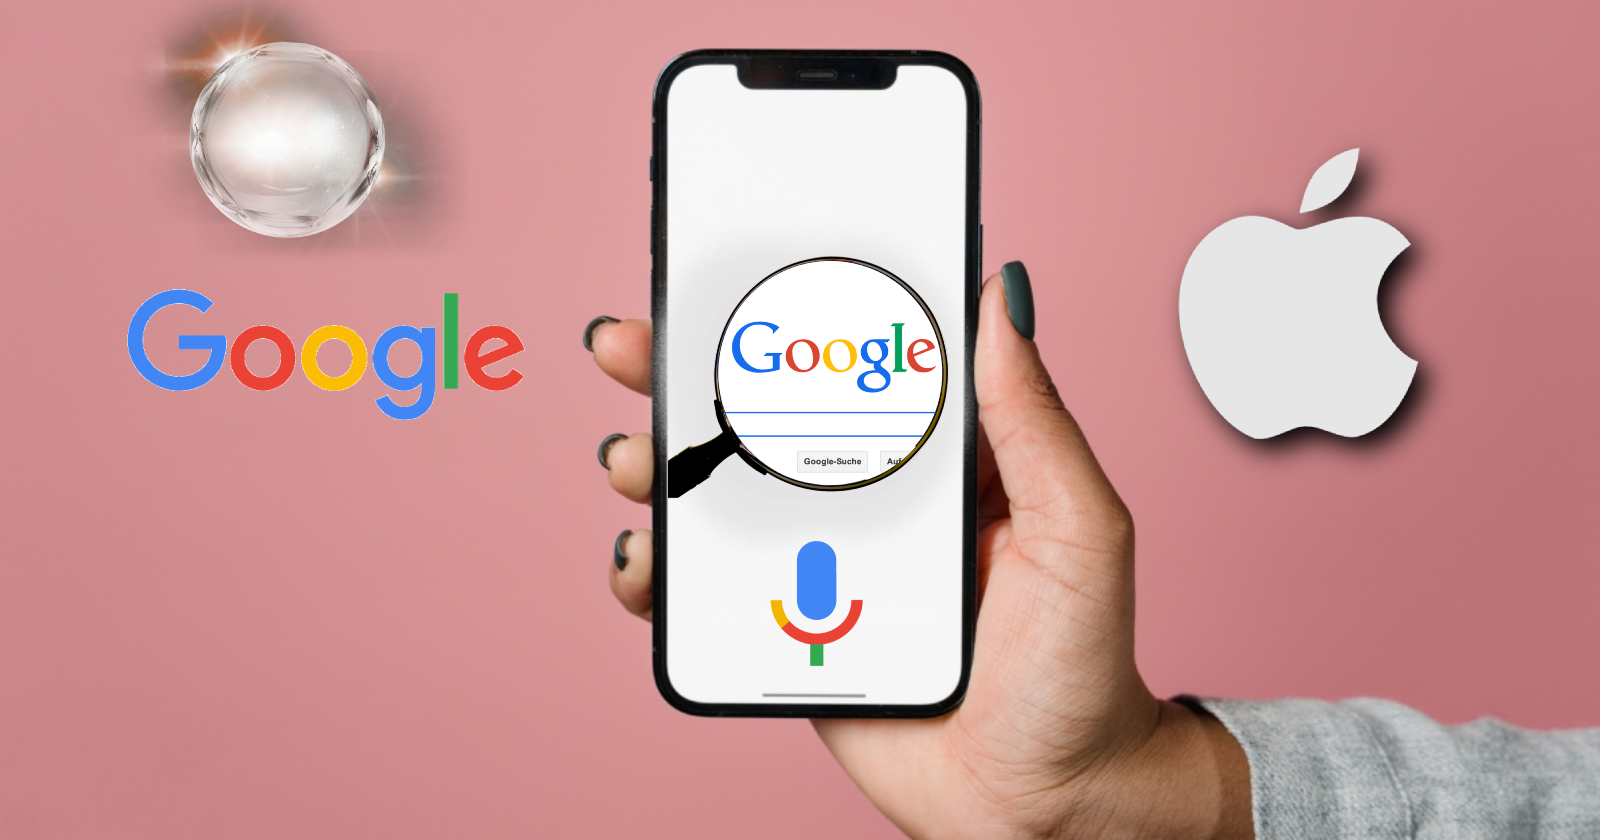 Good move from Google: New features on the way for popular apps!